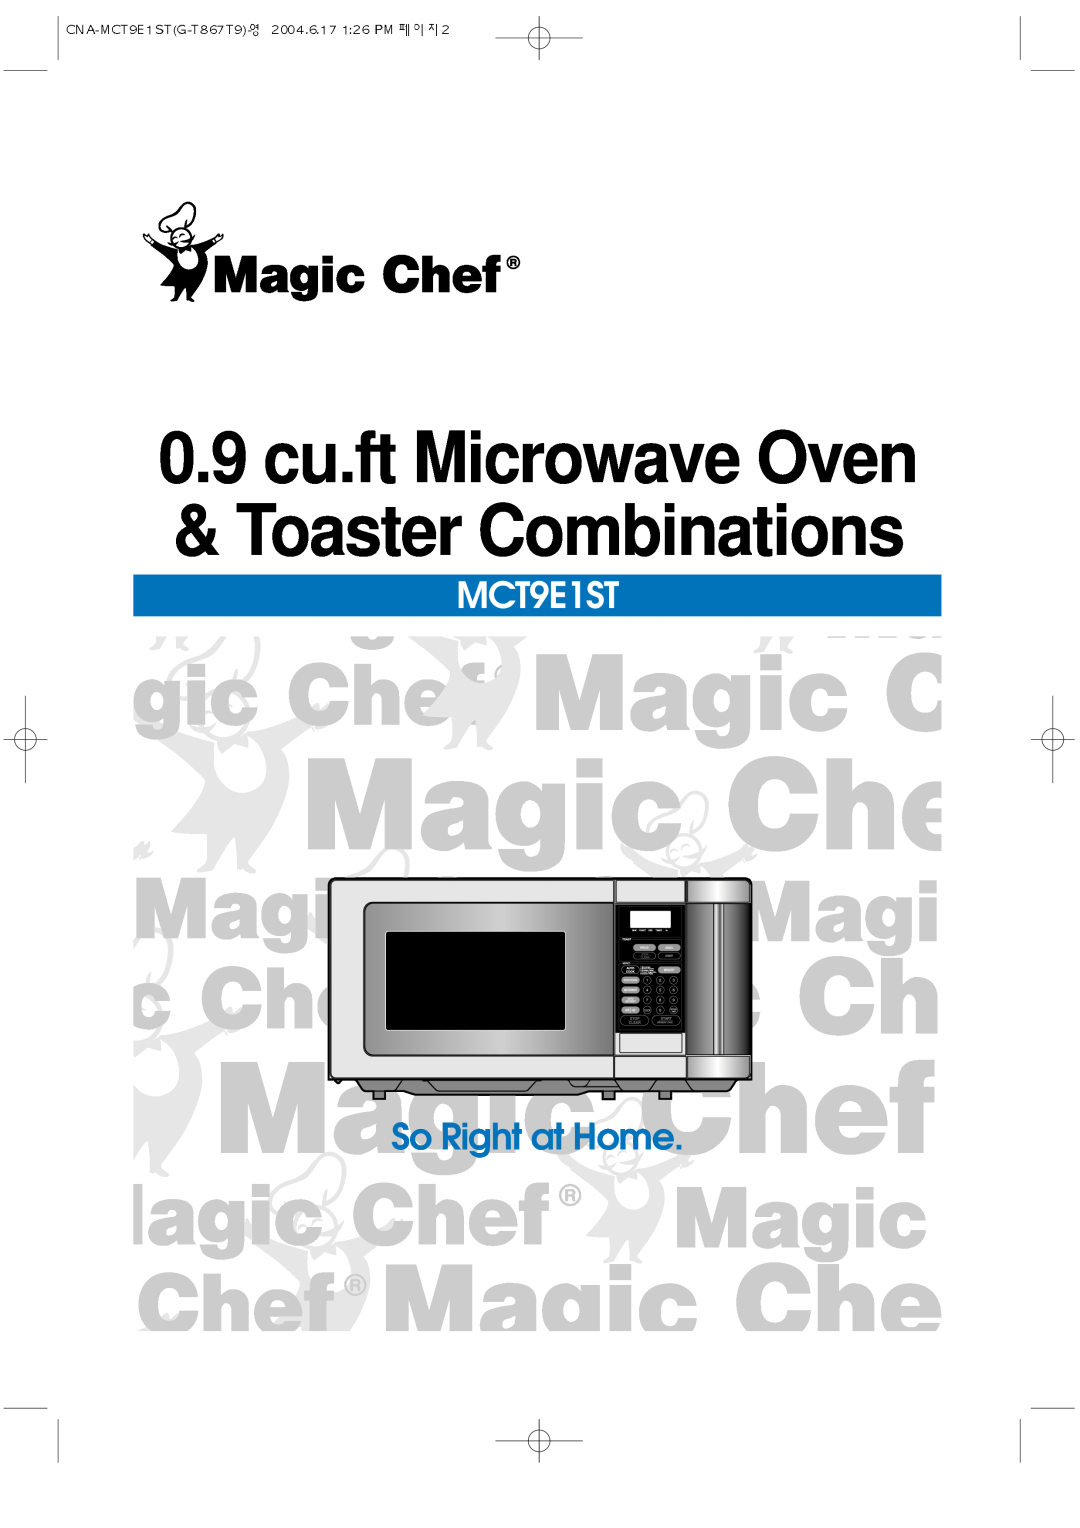 Magic Chef MCT9E1ST manual 0.9 cu.ft Microwave Oven & Toaster Combinations, So Right at Home 